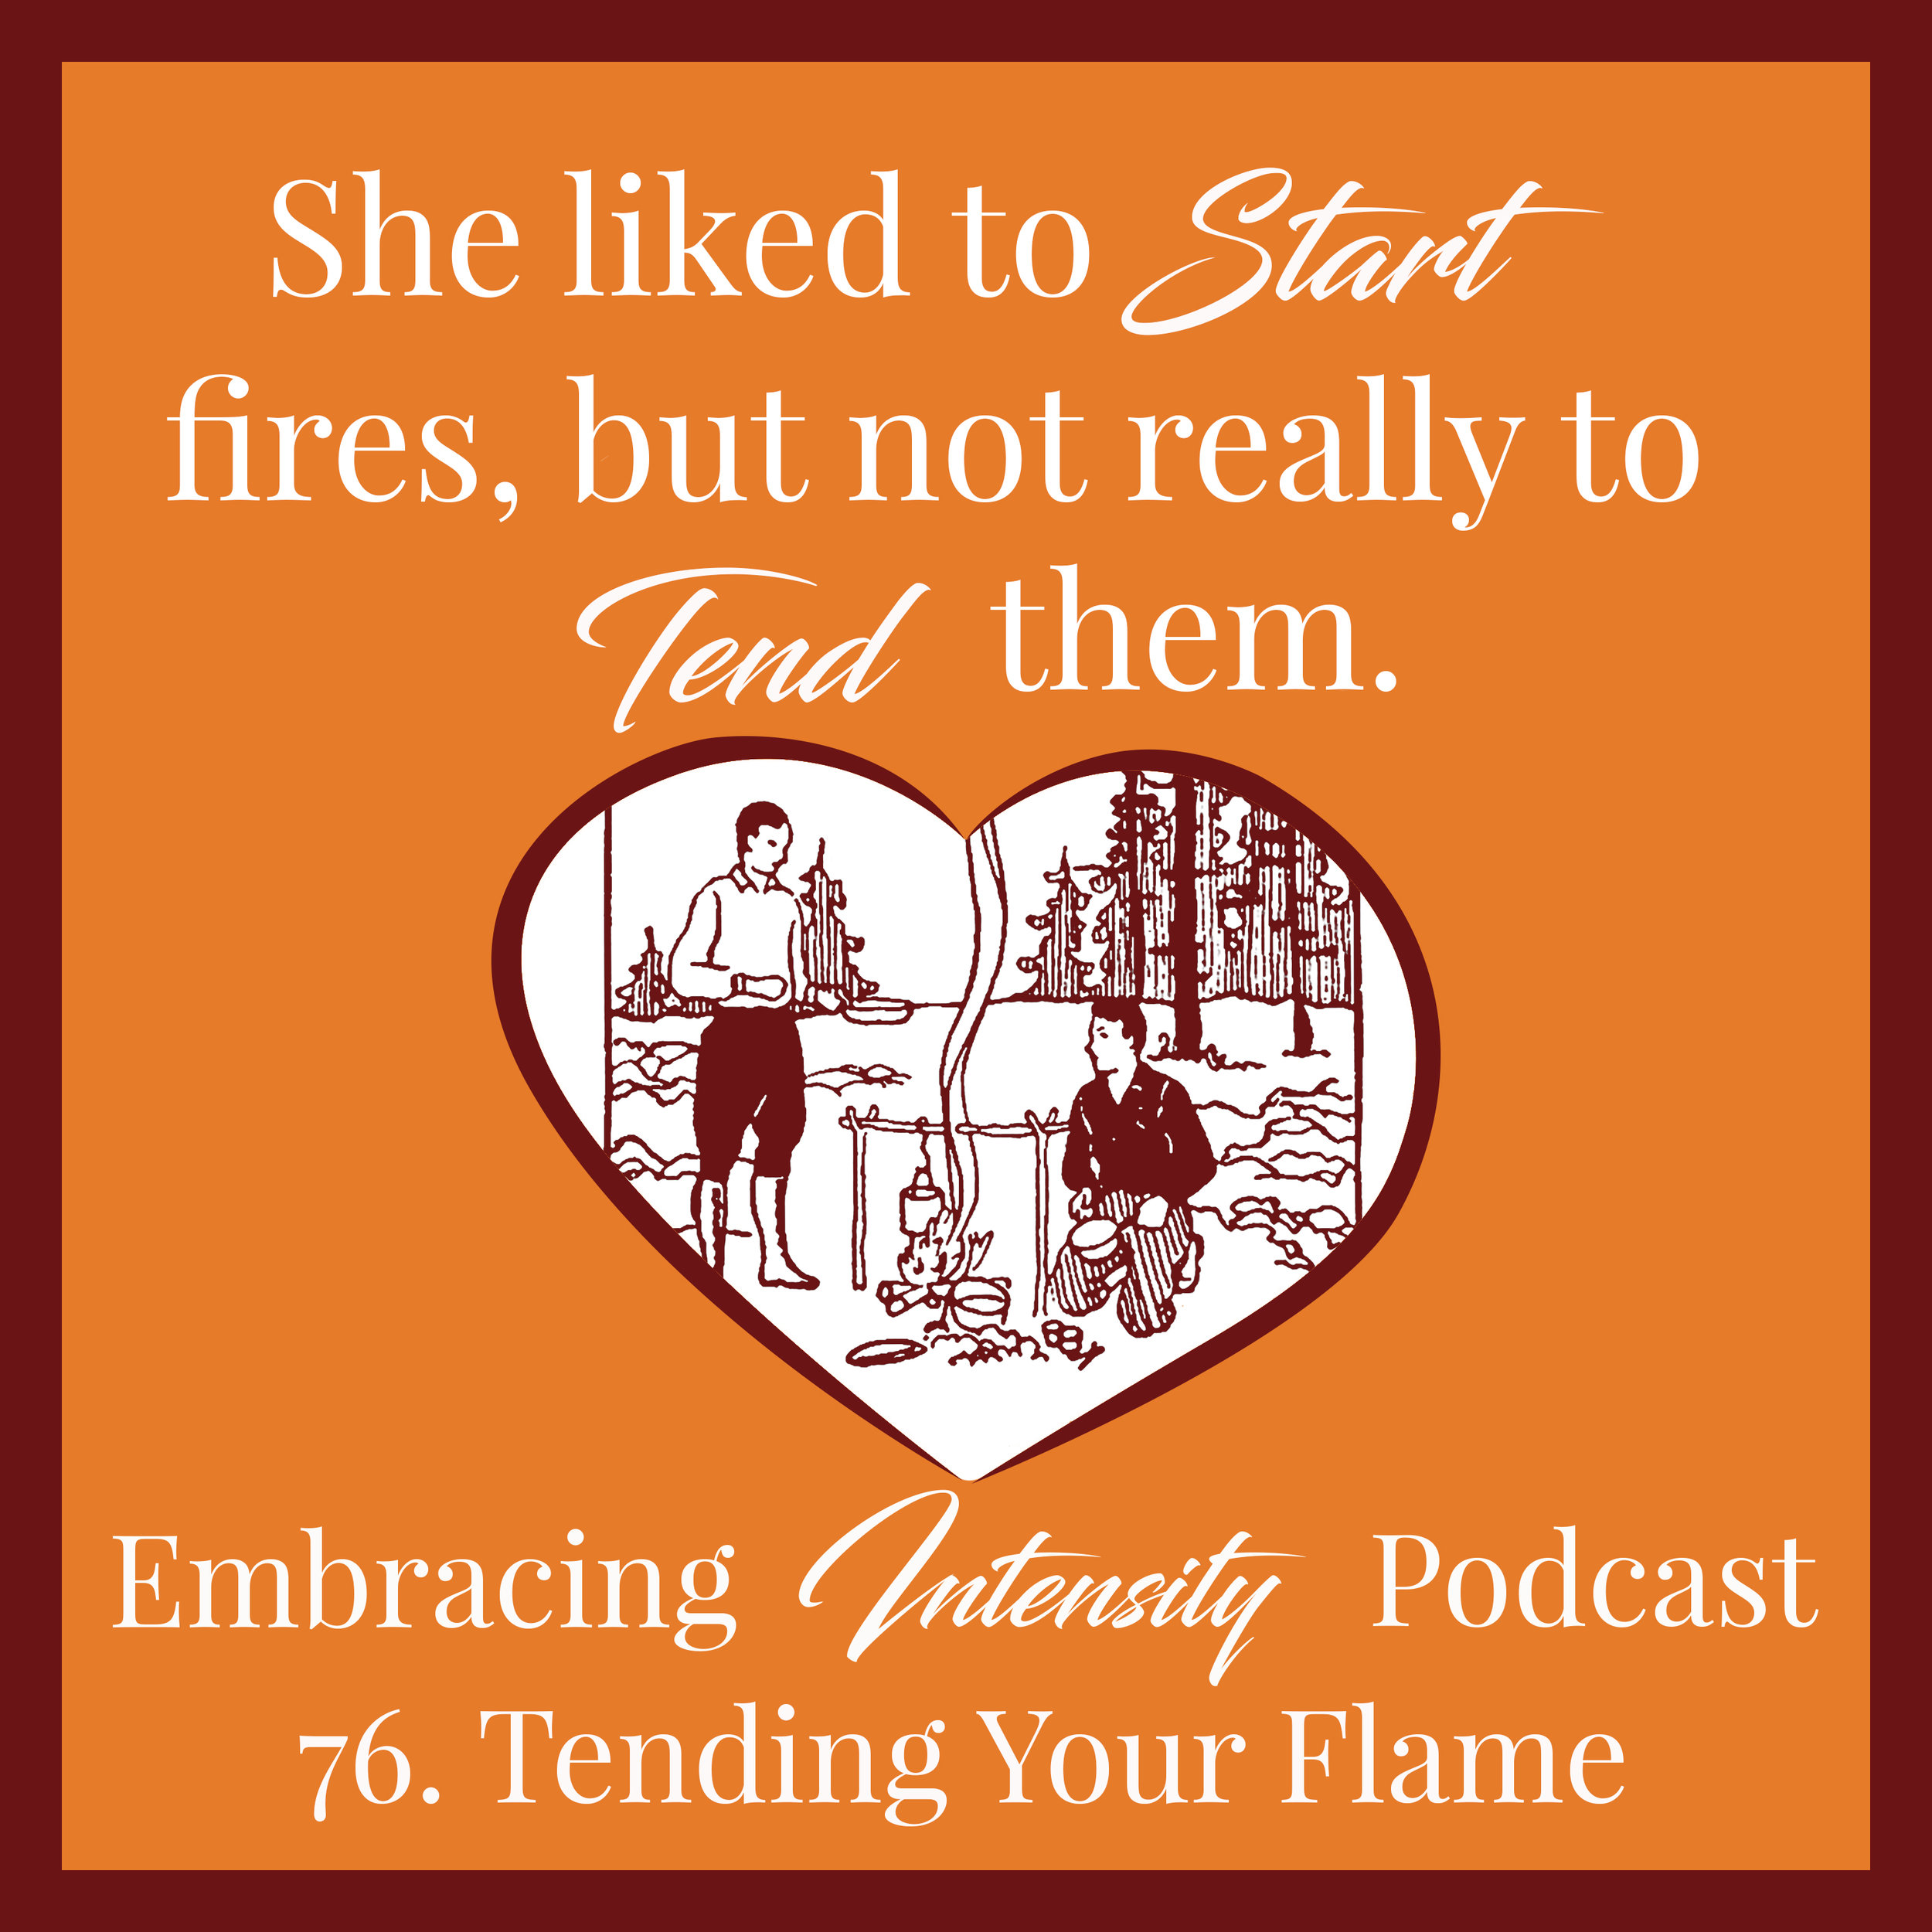 Tending Your Flame - Embracing Intensity Podcast